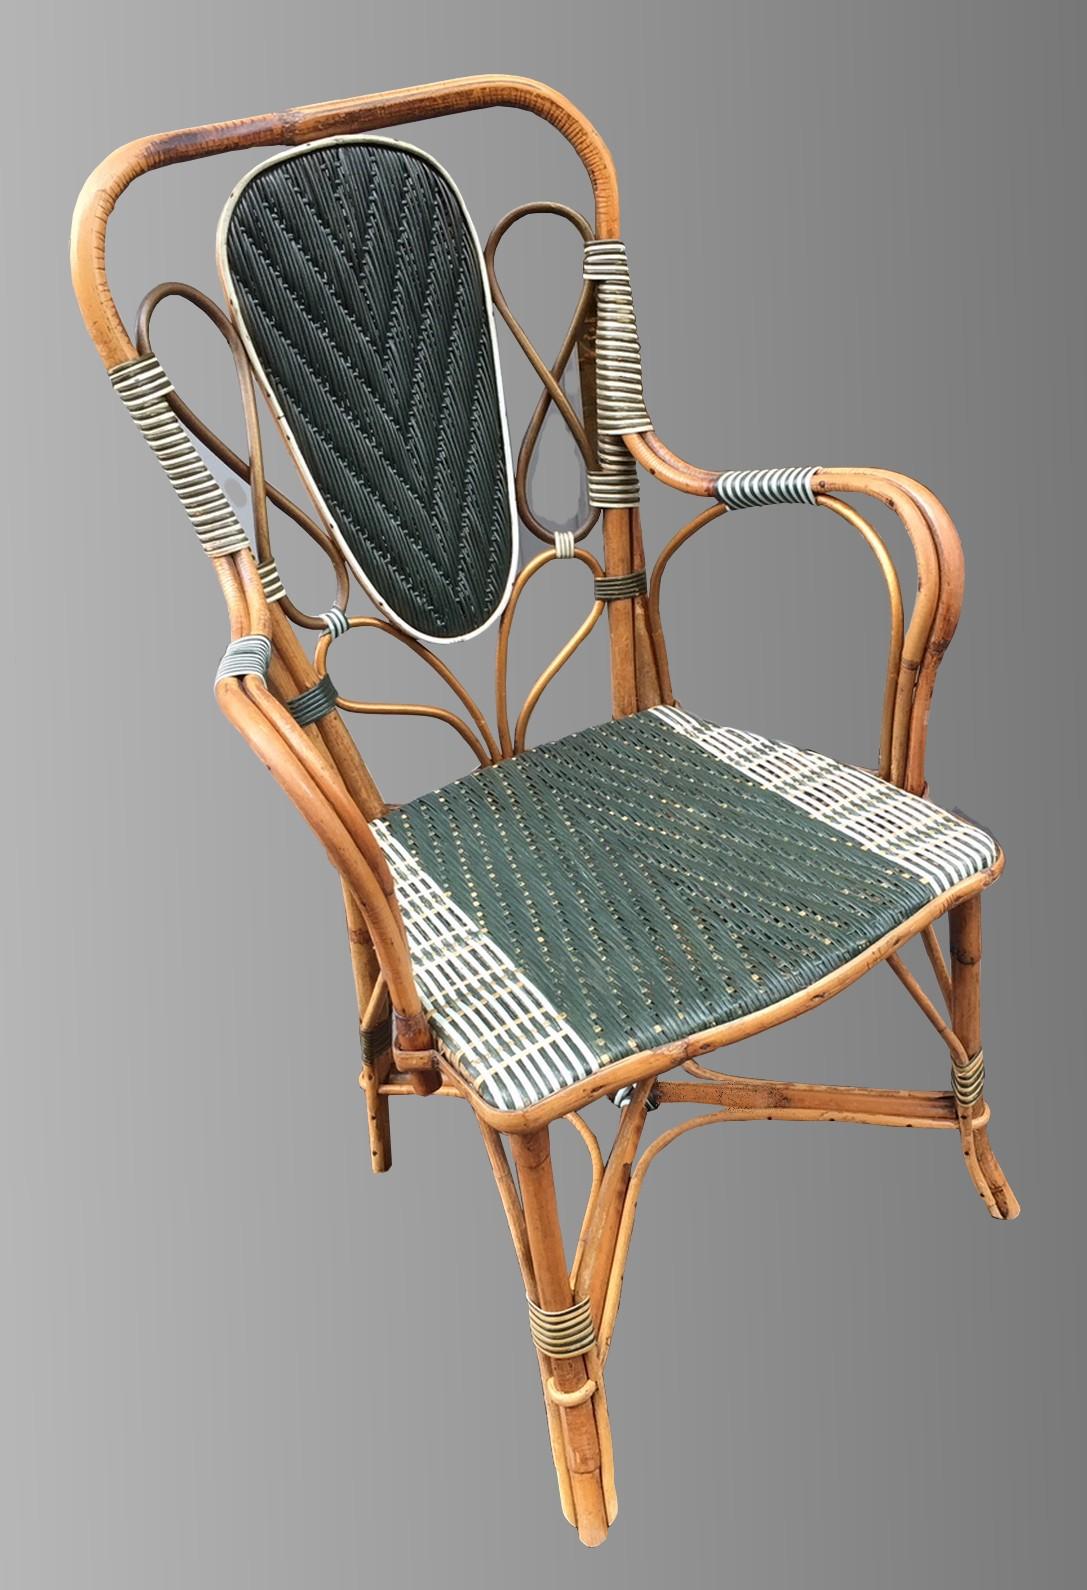 Beautiful set of winter garden composed of two armchairs, a table and a bench of feet, in cane of natural rattan and lacquered green and white cane . France 1920.

Dimension of one armchair.
Width: 22.83 in
Depth: 18.50 in
Height: 39.37